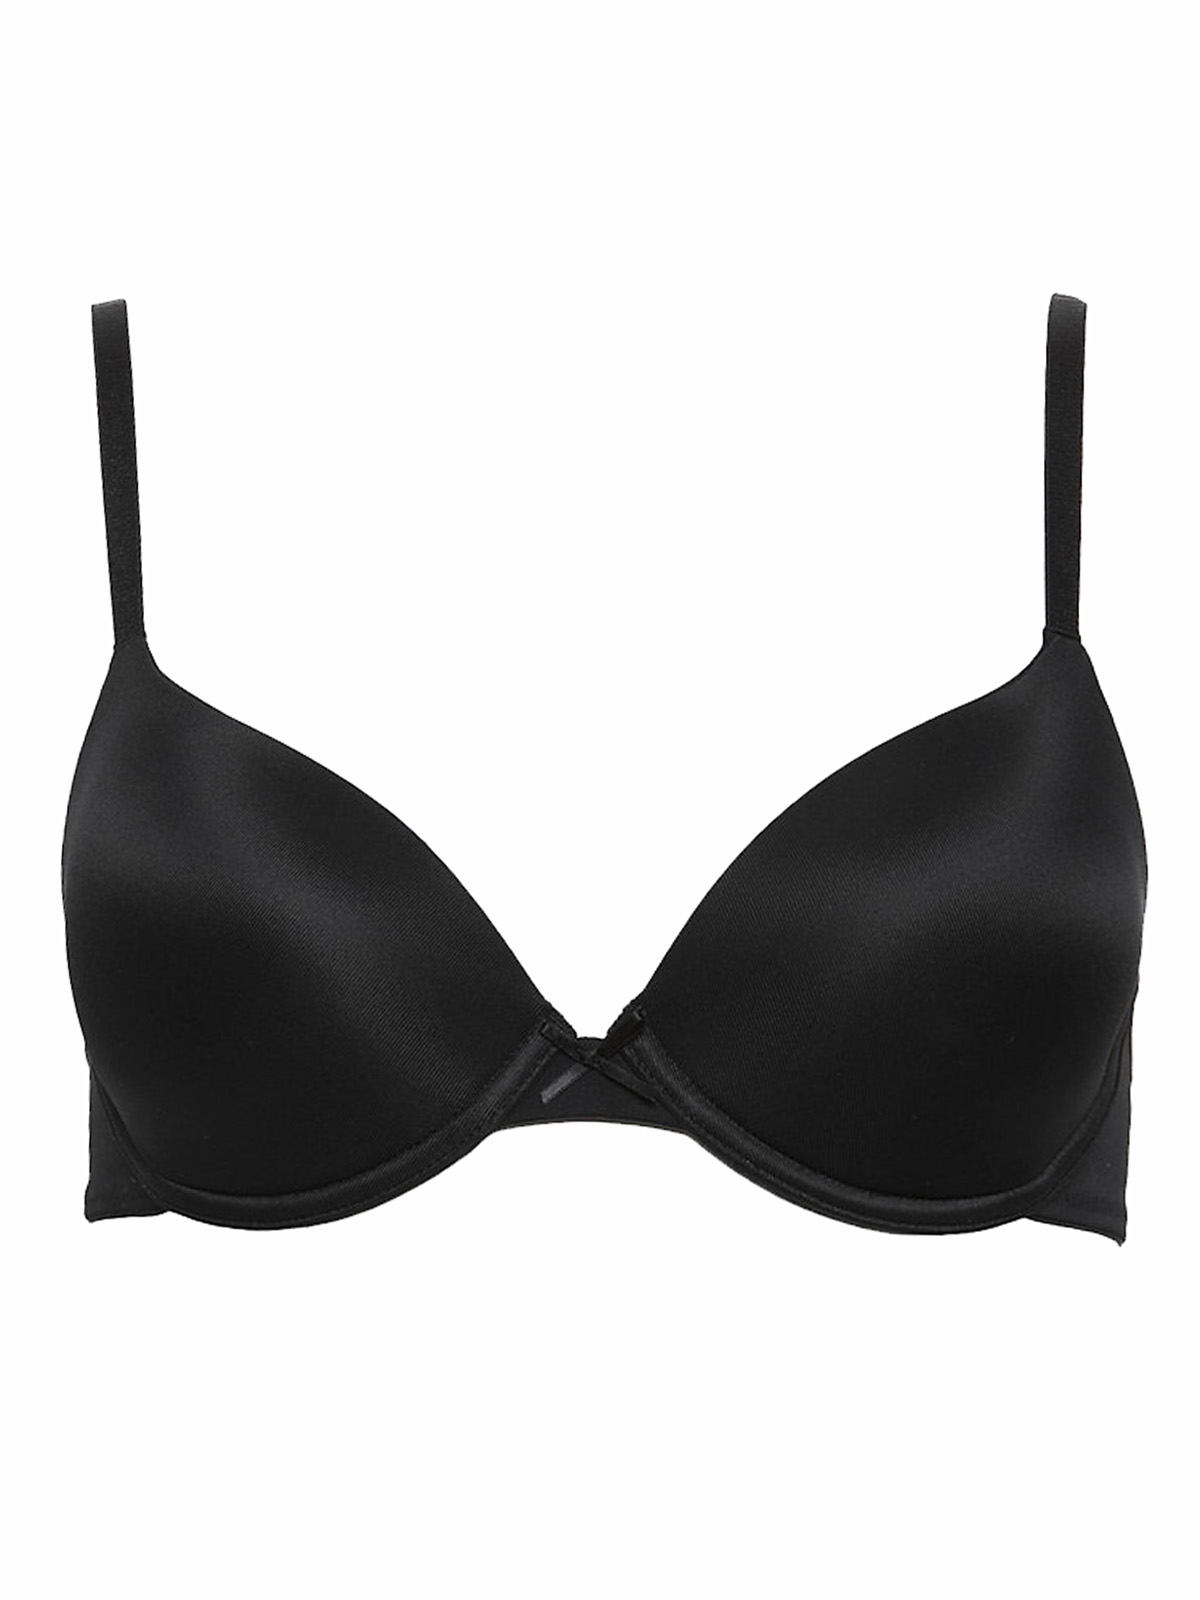 Marks and Spencer - - M&5 BLACK Underwired T-Shirt Balcony Bra - Size ...